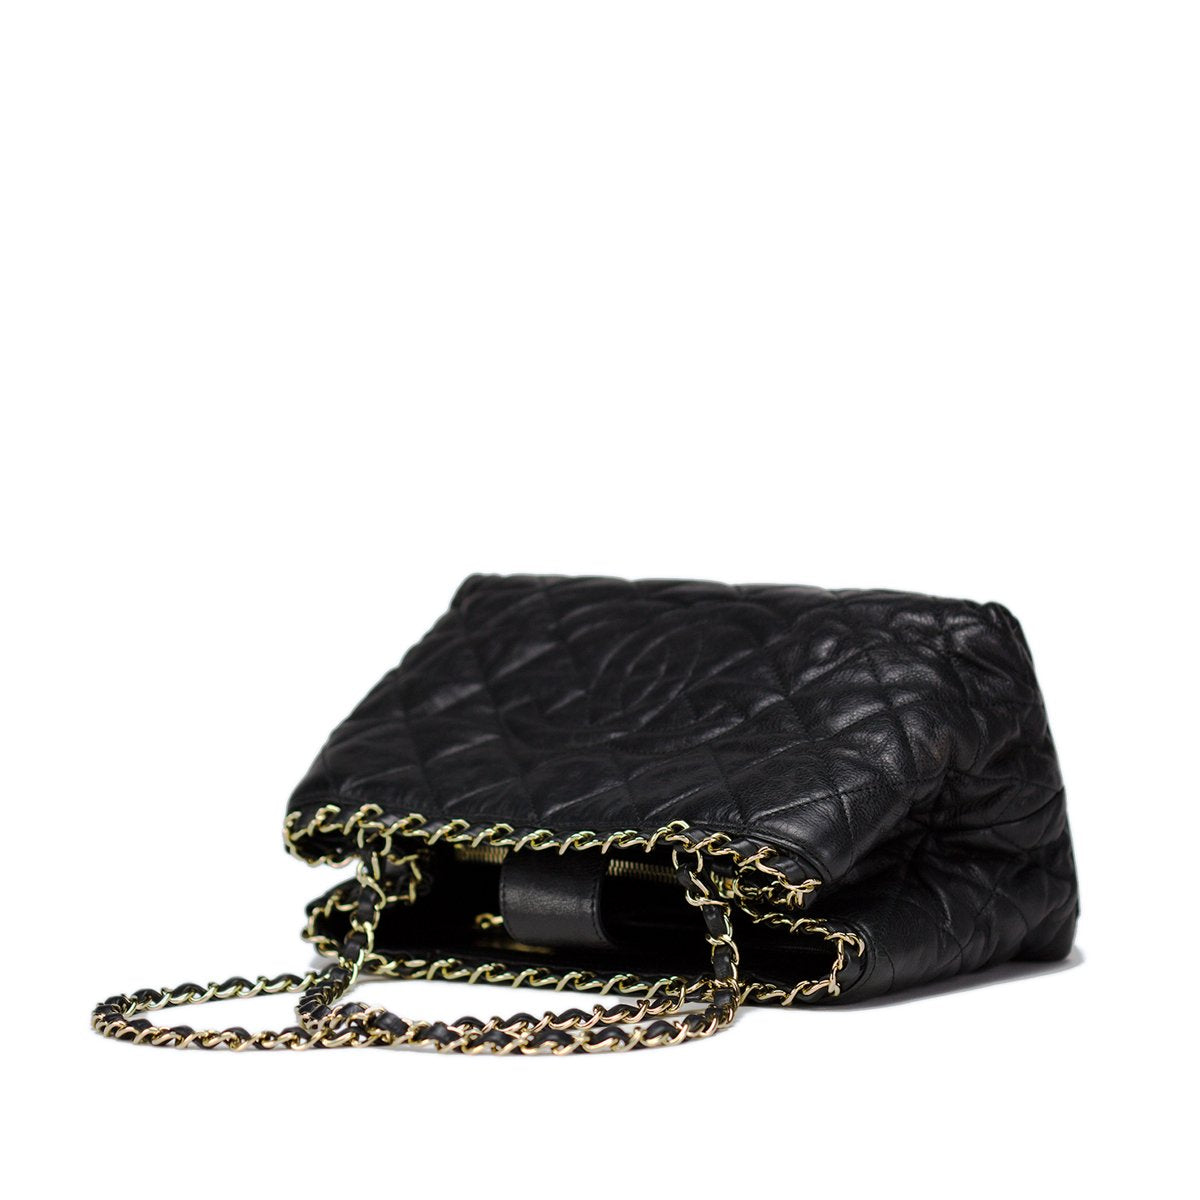 Chanel Black Quilted Lambskin Leather Chain Shopping Tote